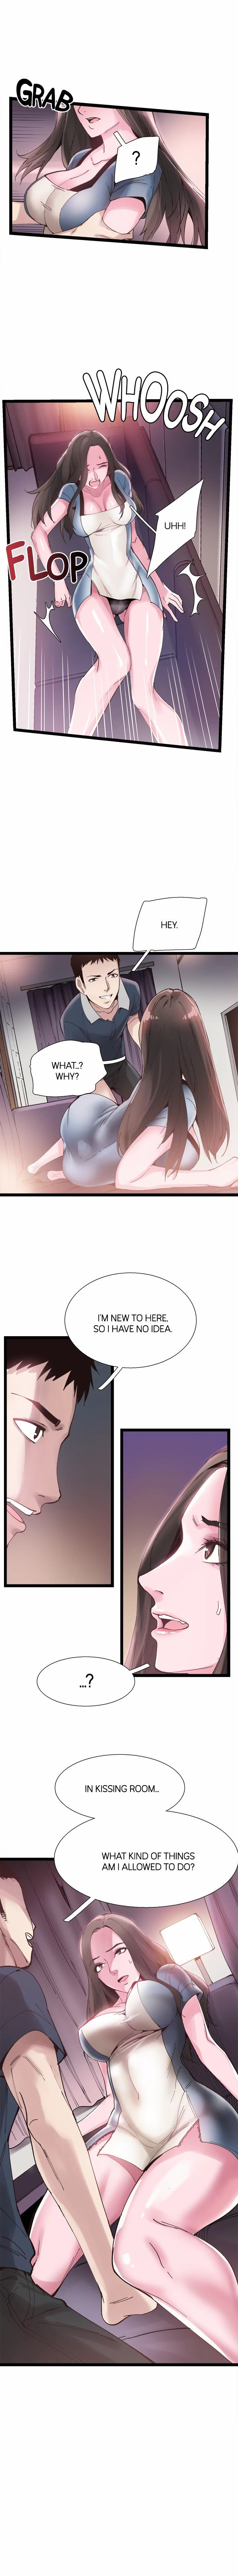 Campus Live - Chapter 8 Page 2